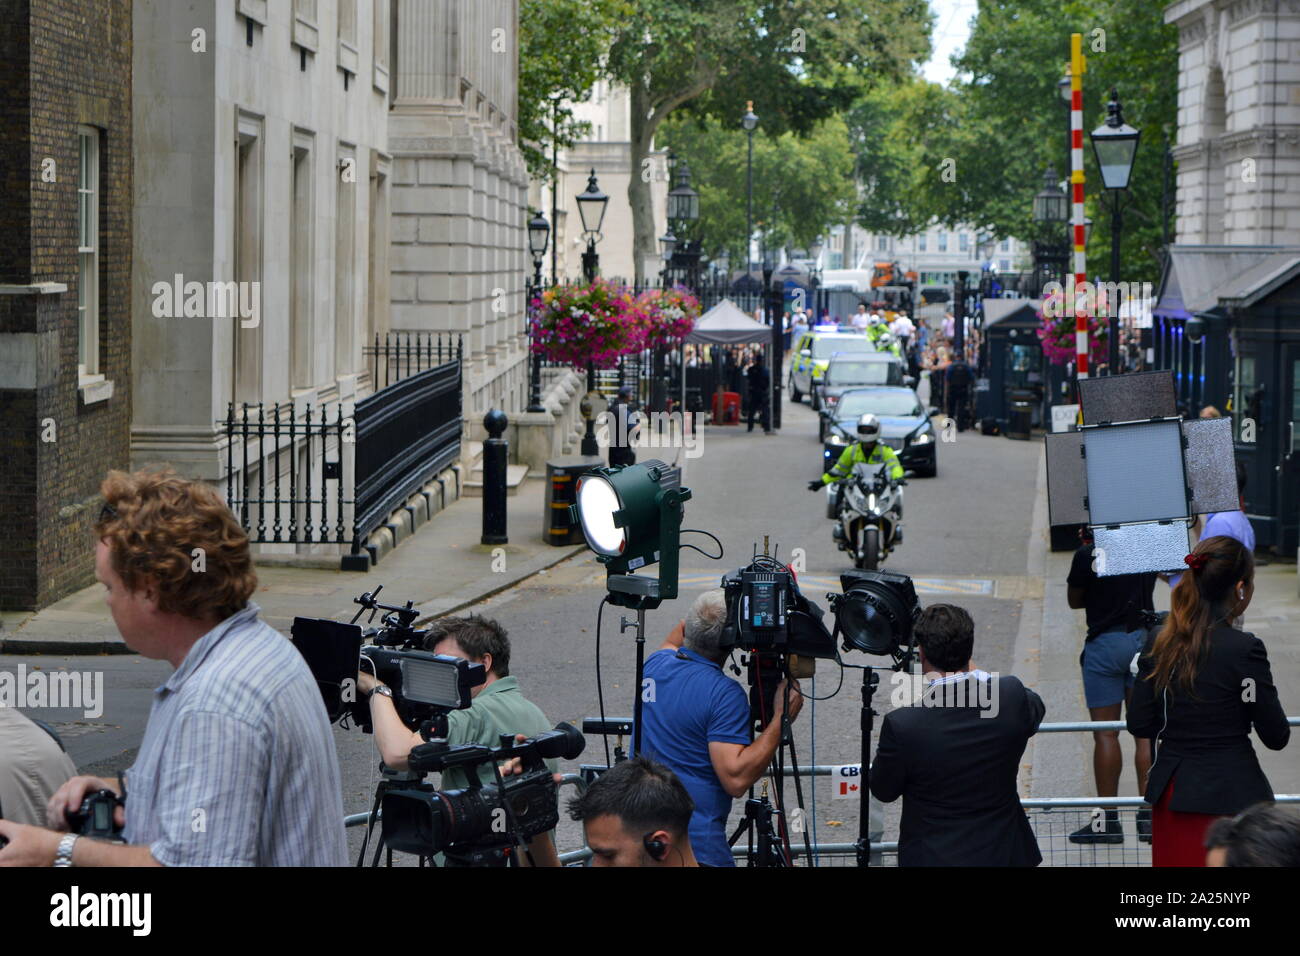 Press gathered in downing street, london, the official residences and offices of the prime minister of the united kingdom and the chancellor of the exchequer. situated off whitehall, a few minutes' walk from the houses of parliament, downing street was built in the 1680s by sir george downing. Stock Photo